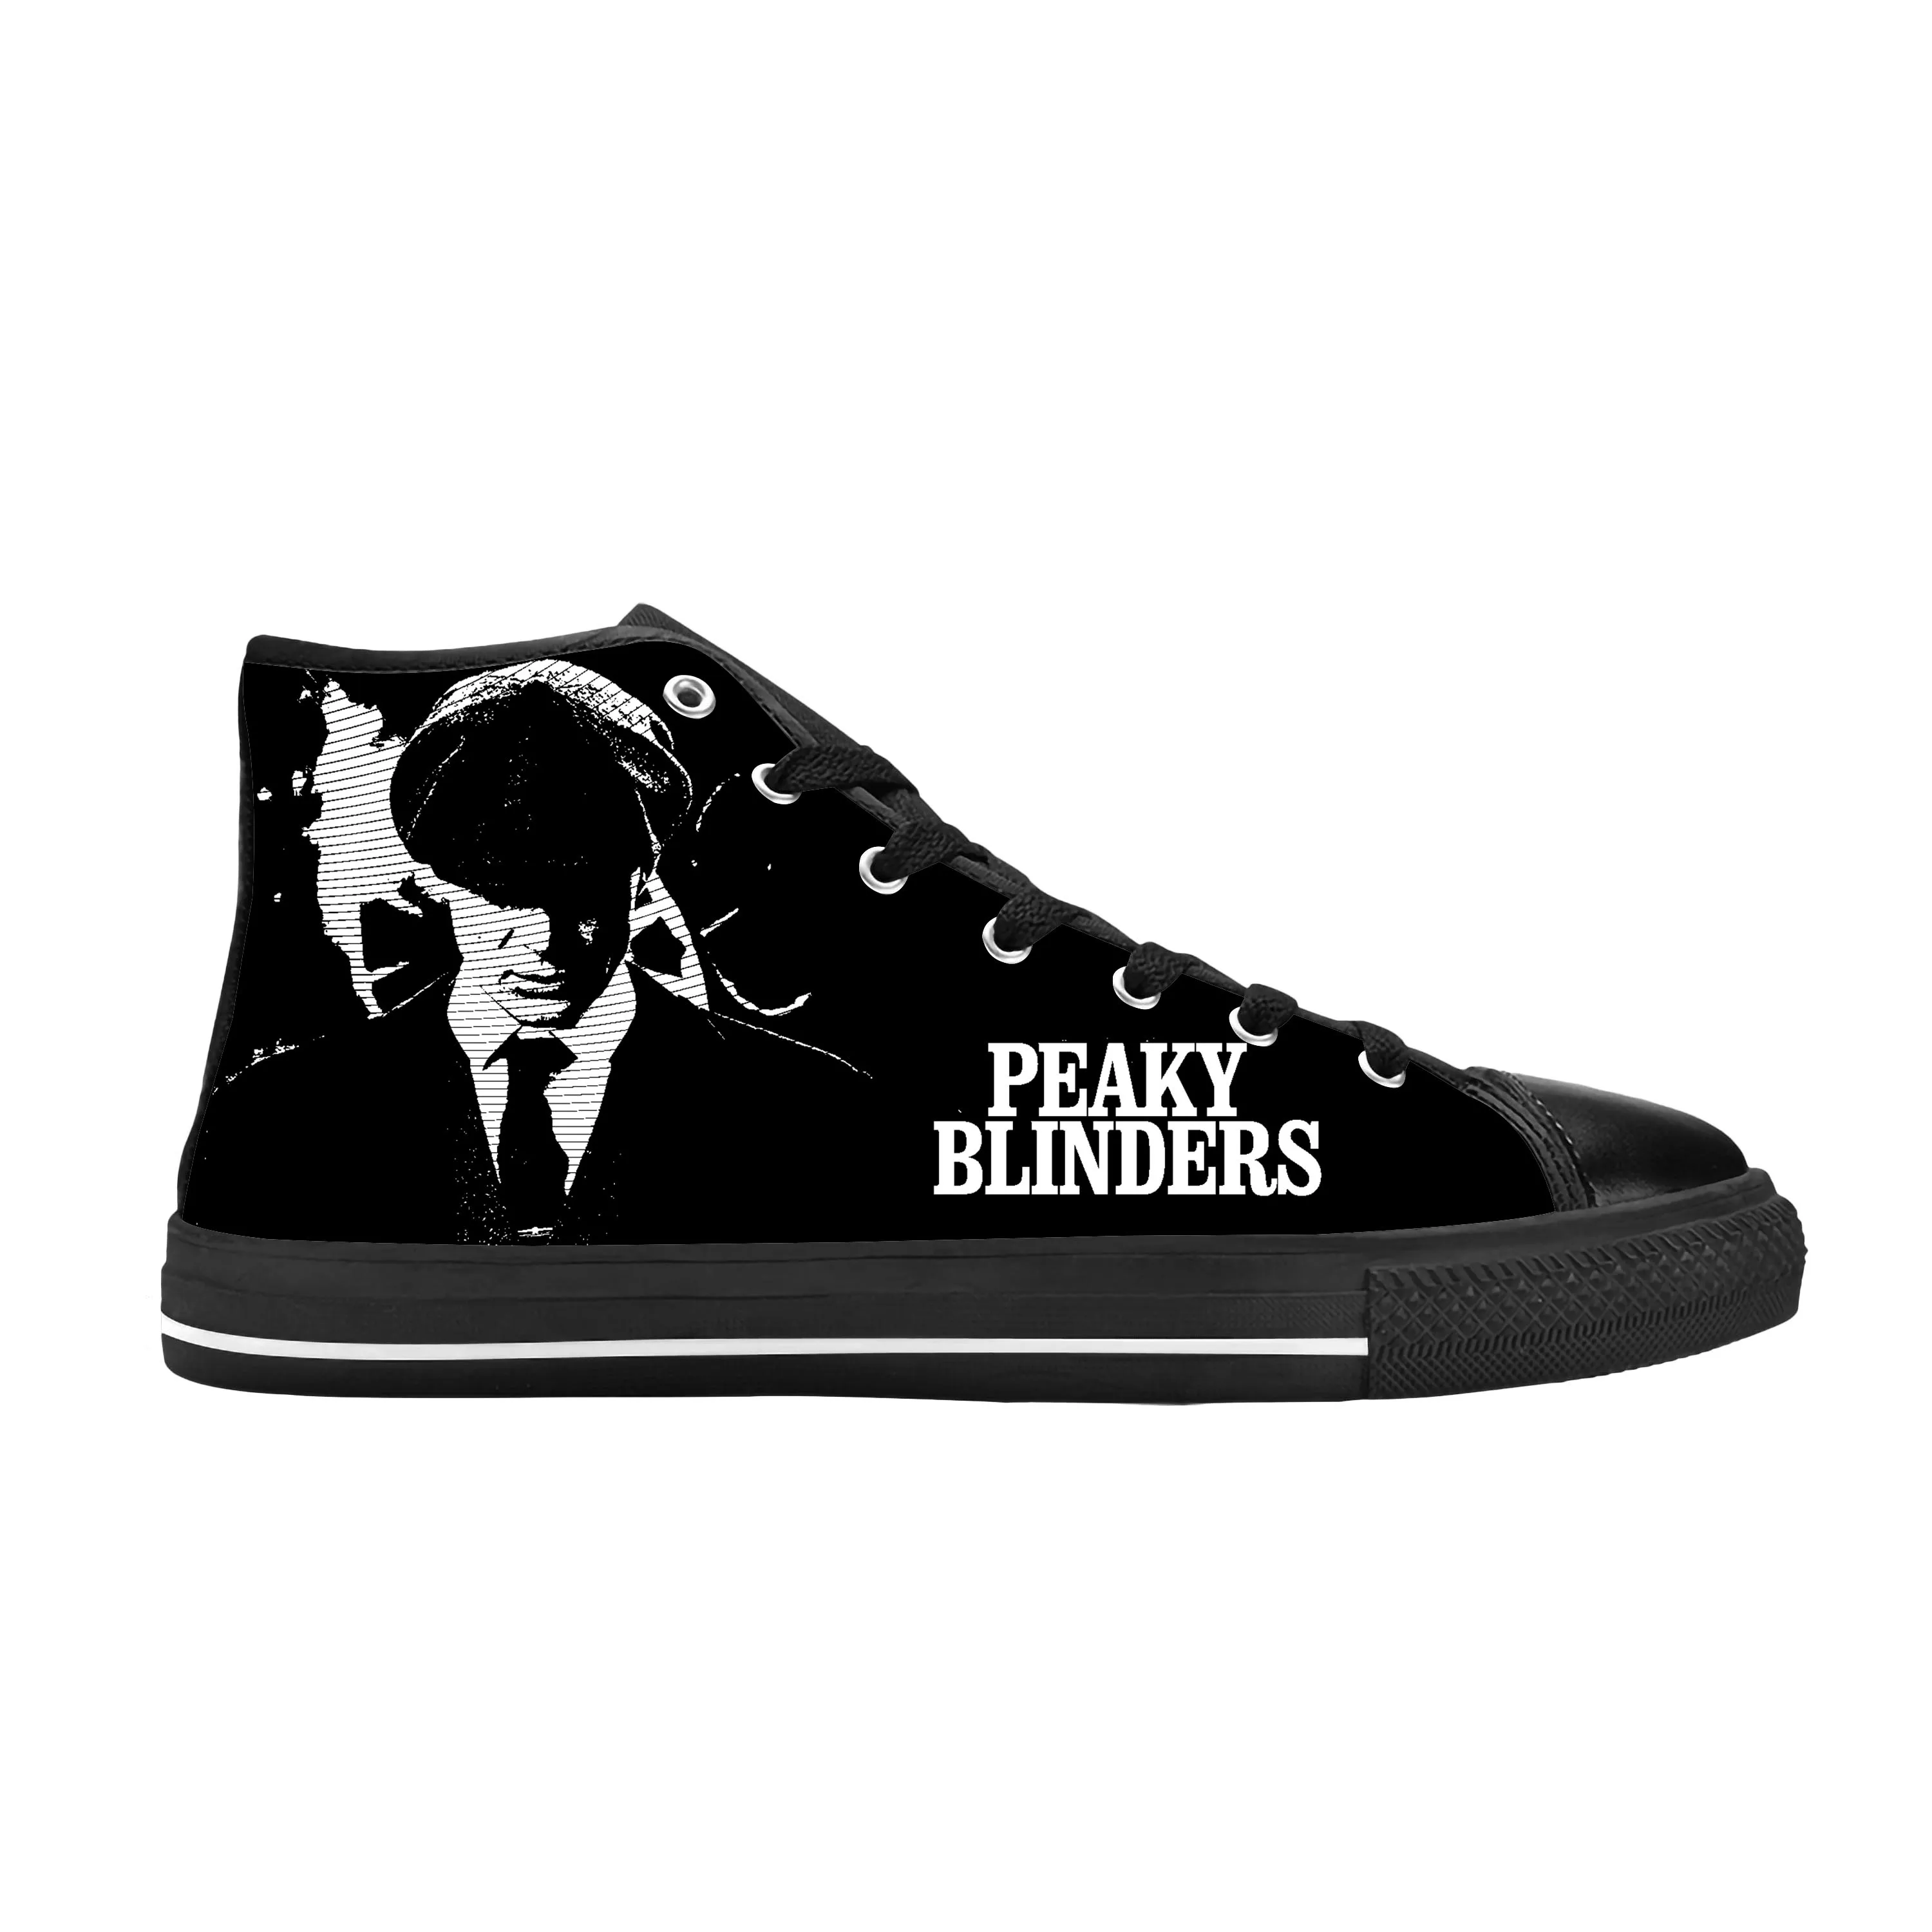 

TV Movie Film Thomas Shelby Peaky Blinders Funny Casual Cloth Shoes High Top Comfortable Breathable 3D Print Men Women Sneakers